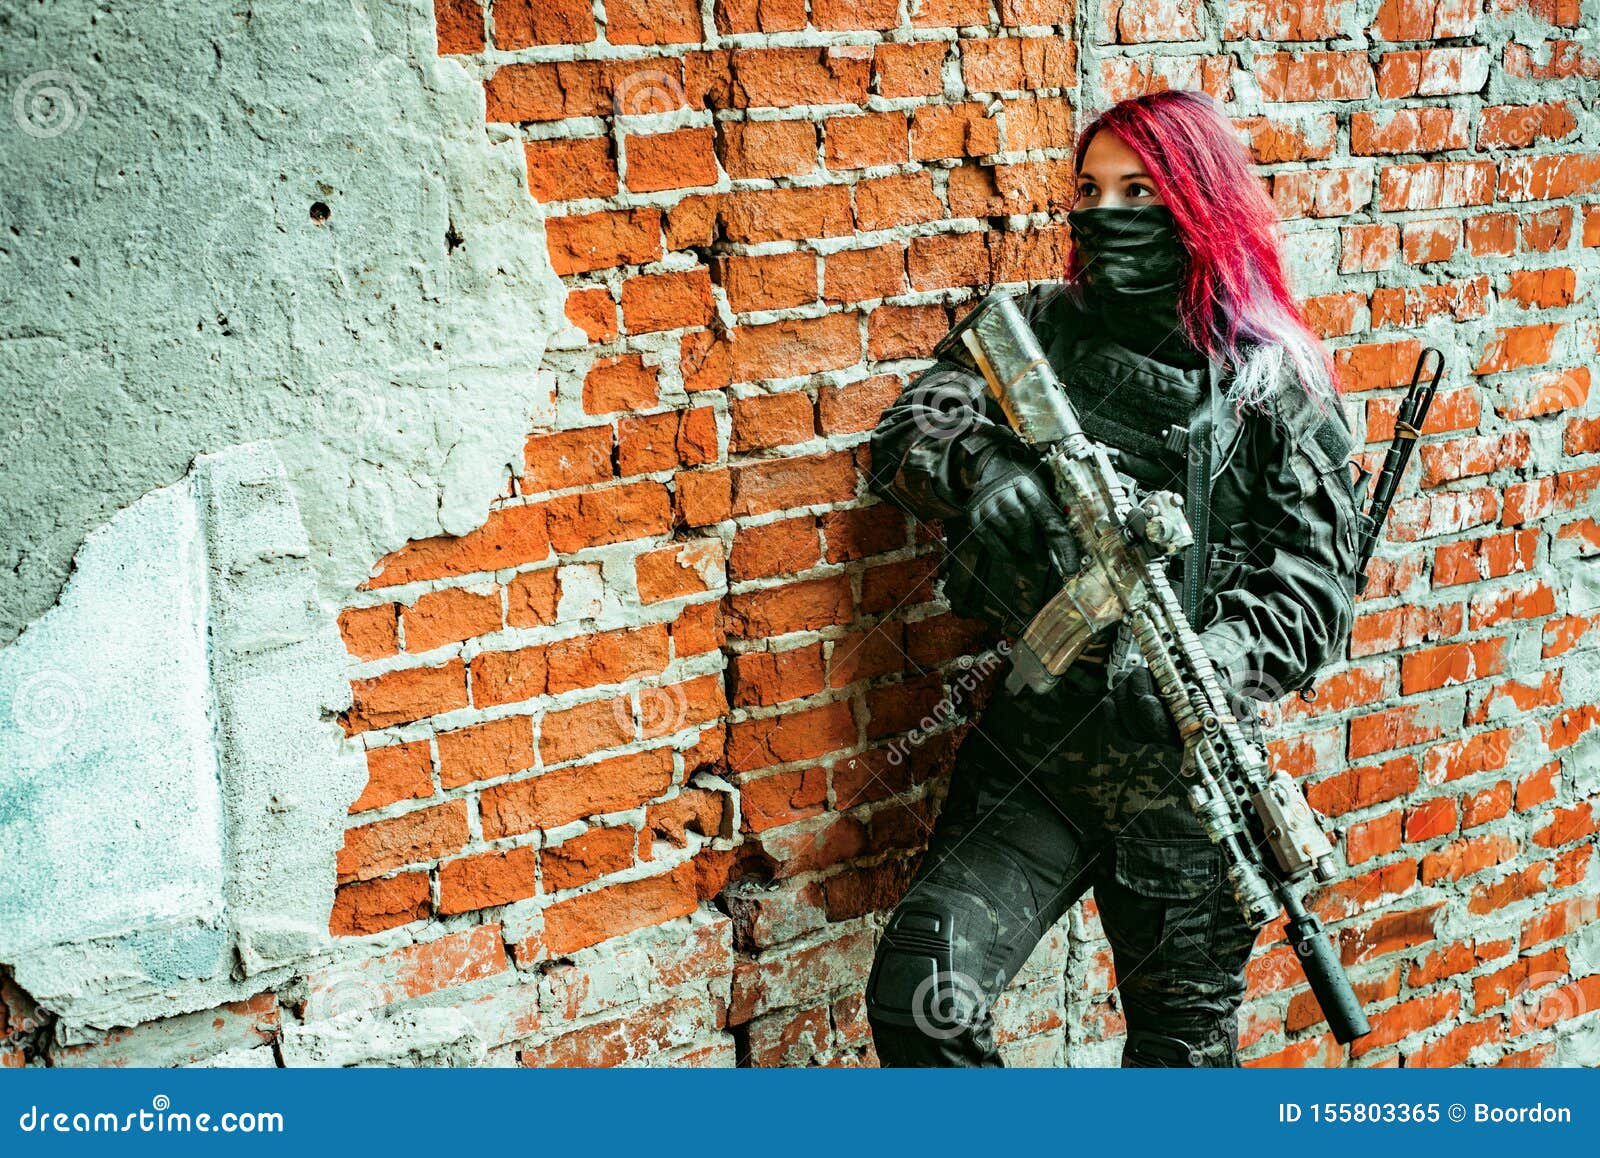 Red-hair Airsoft Woman in Uniform with Machine-gun, Stand beside Brick Wall  Inside Broken Building. Horizontal Background Stock Image - Image of machine,  battle: 155803365